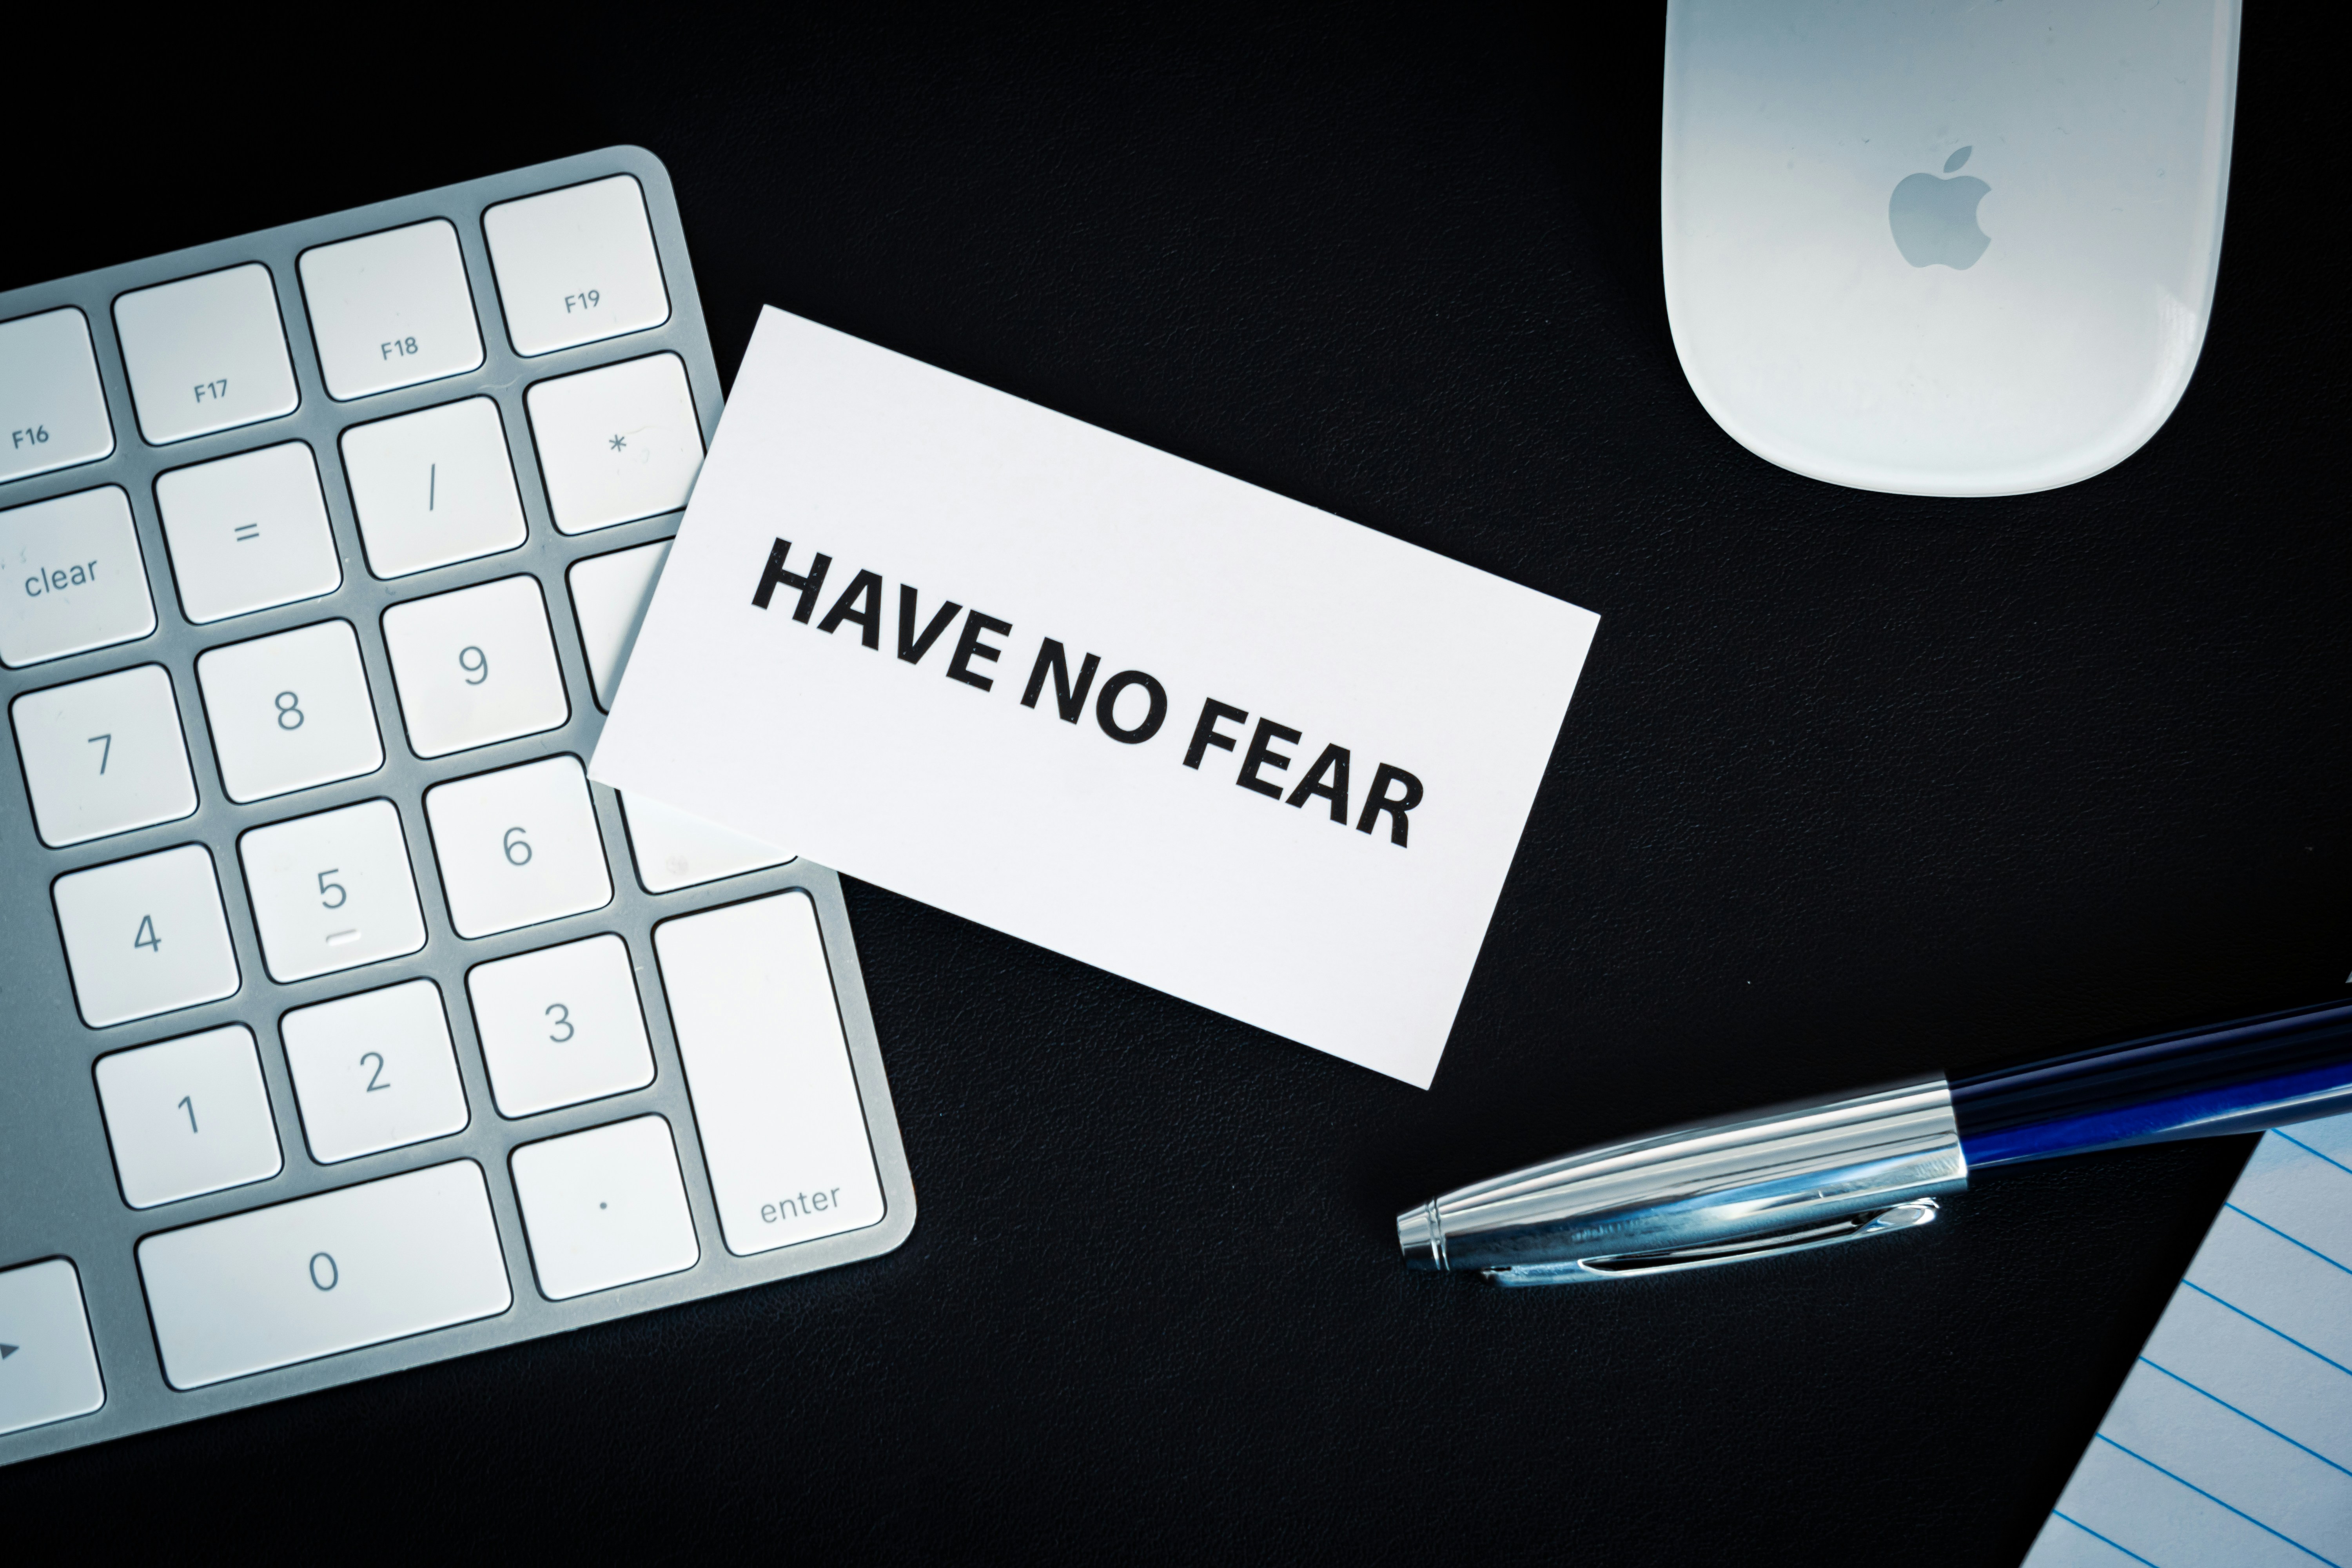 Card saying 'Have no fear' laid across a numerical keypad